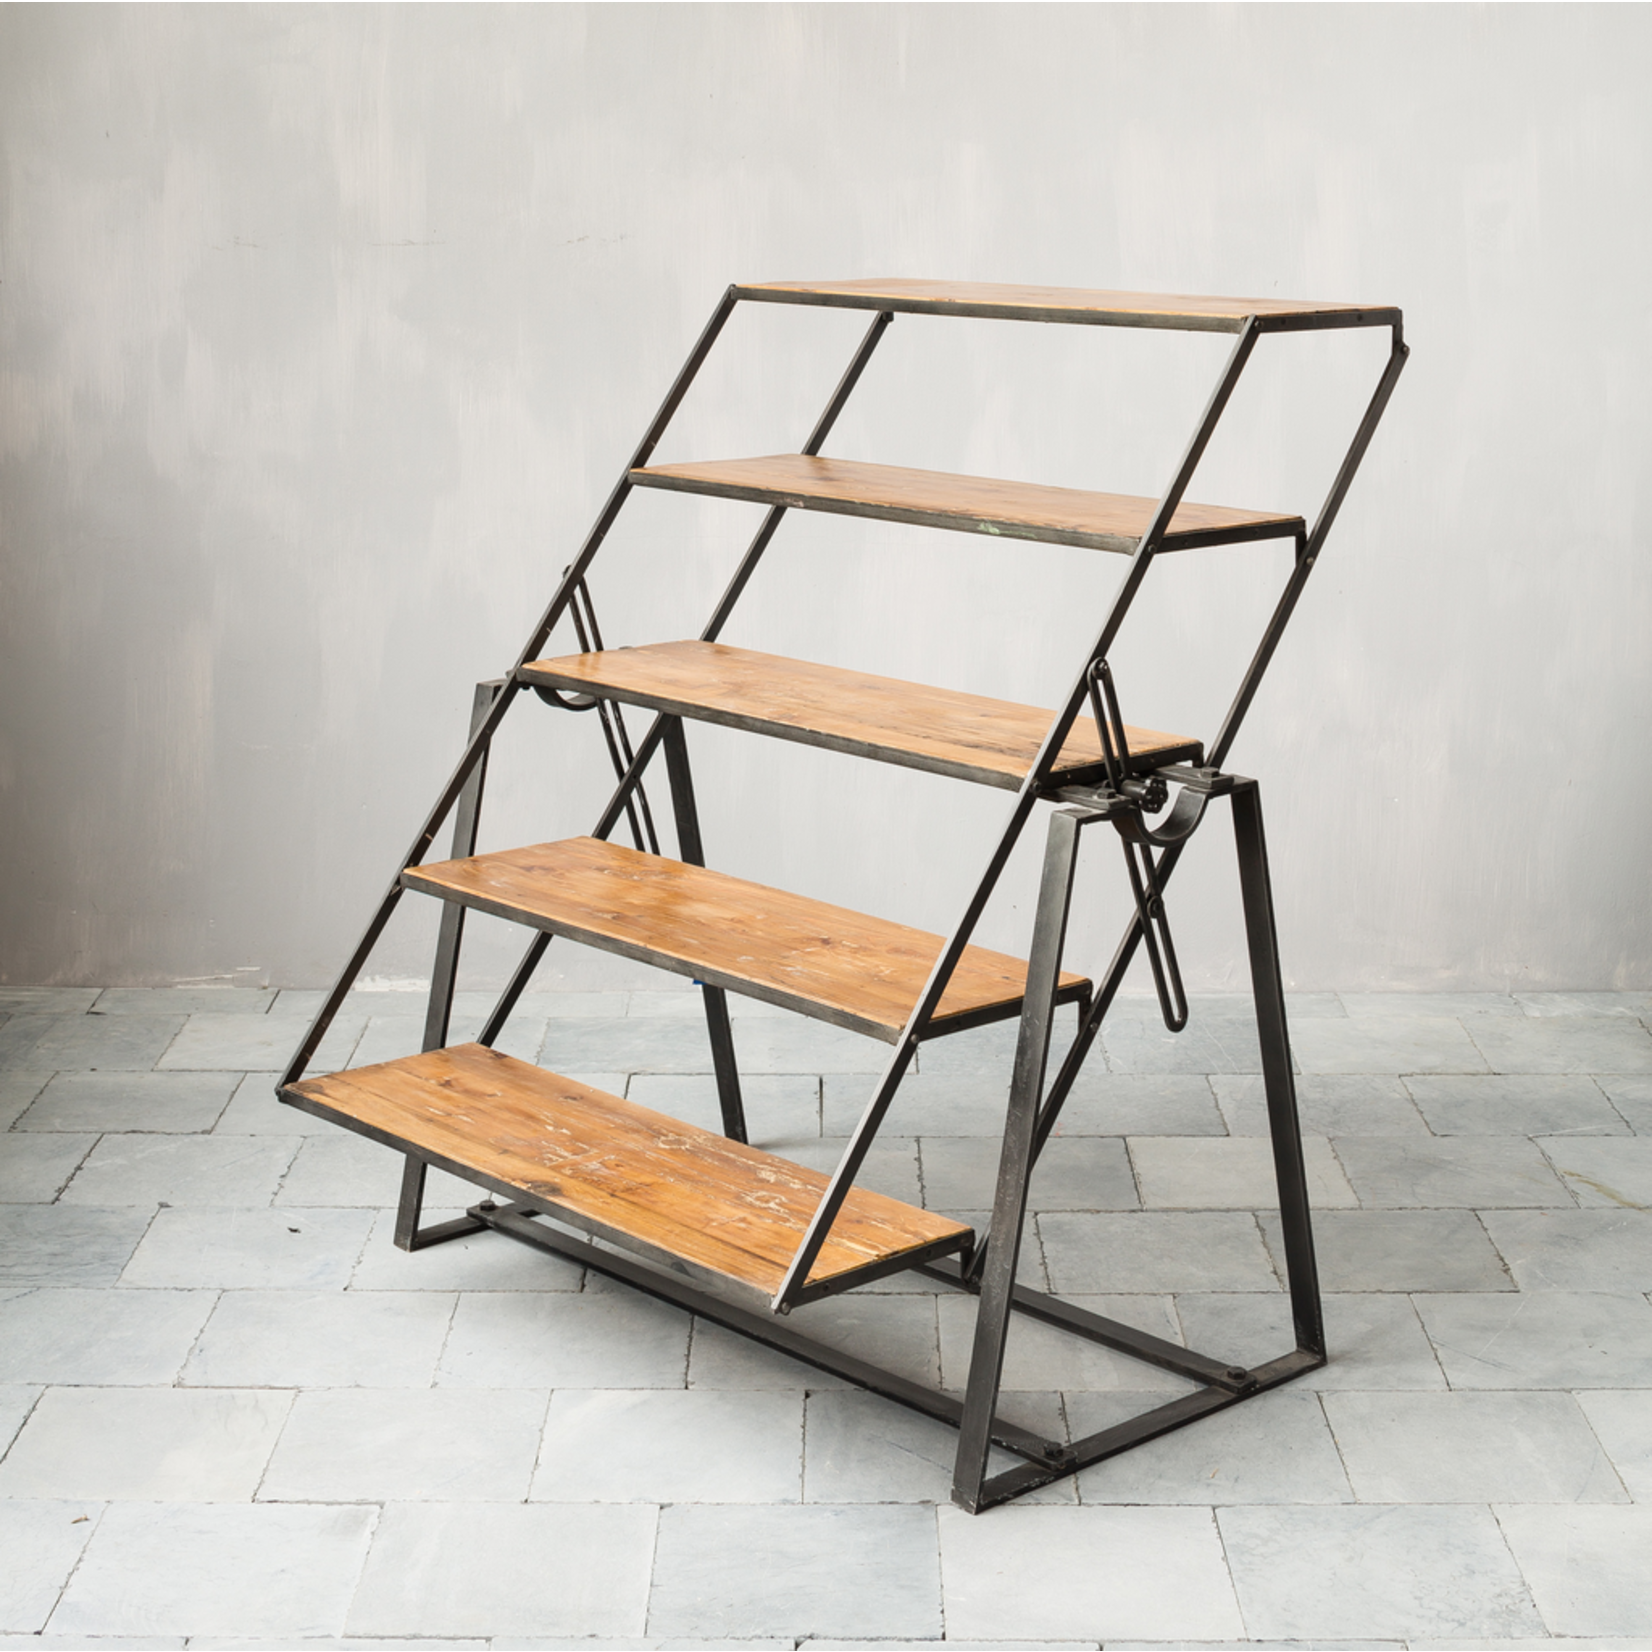 CHEHOMA IRON & WOODEN SHELF WITH 5 LEVELS "STANTON" TABLE